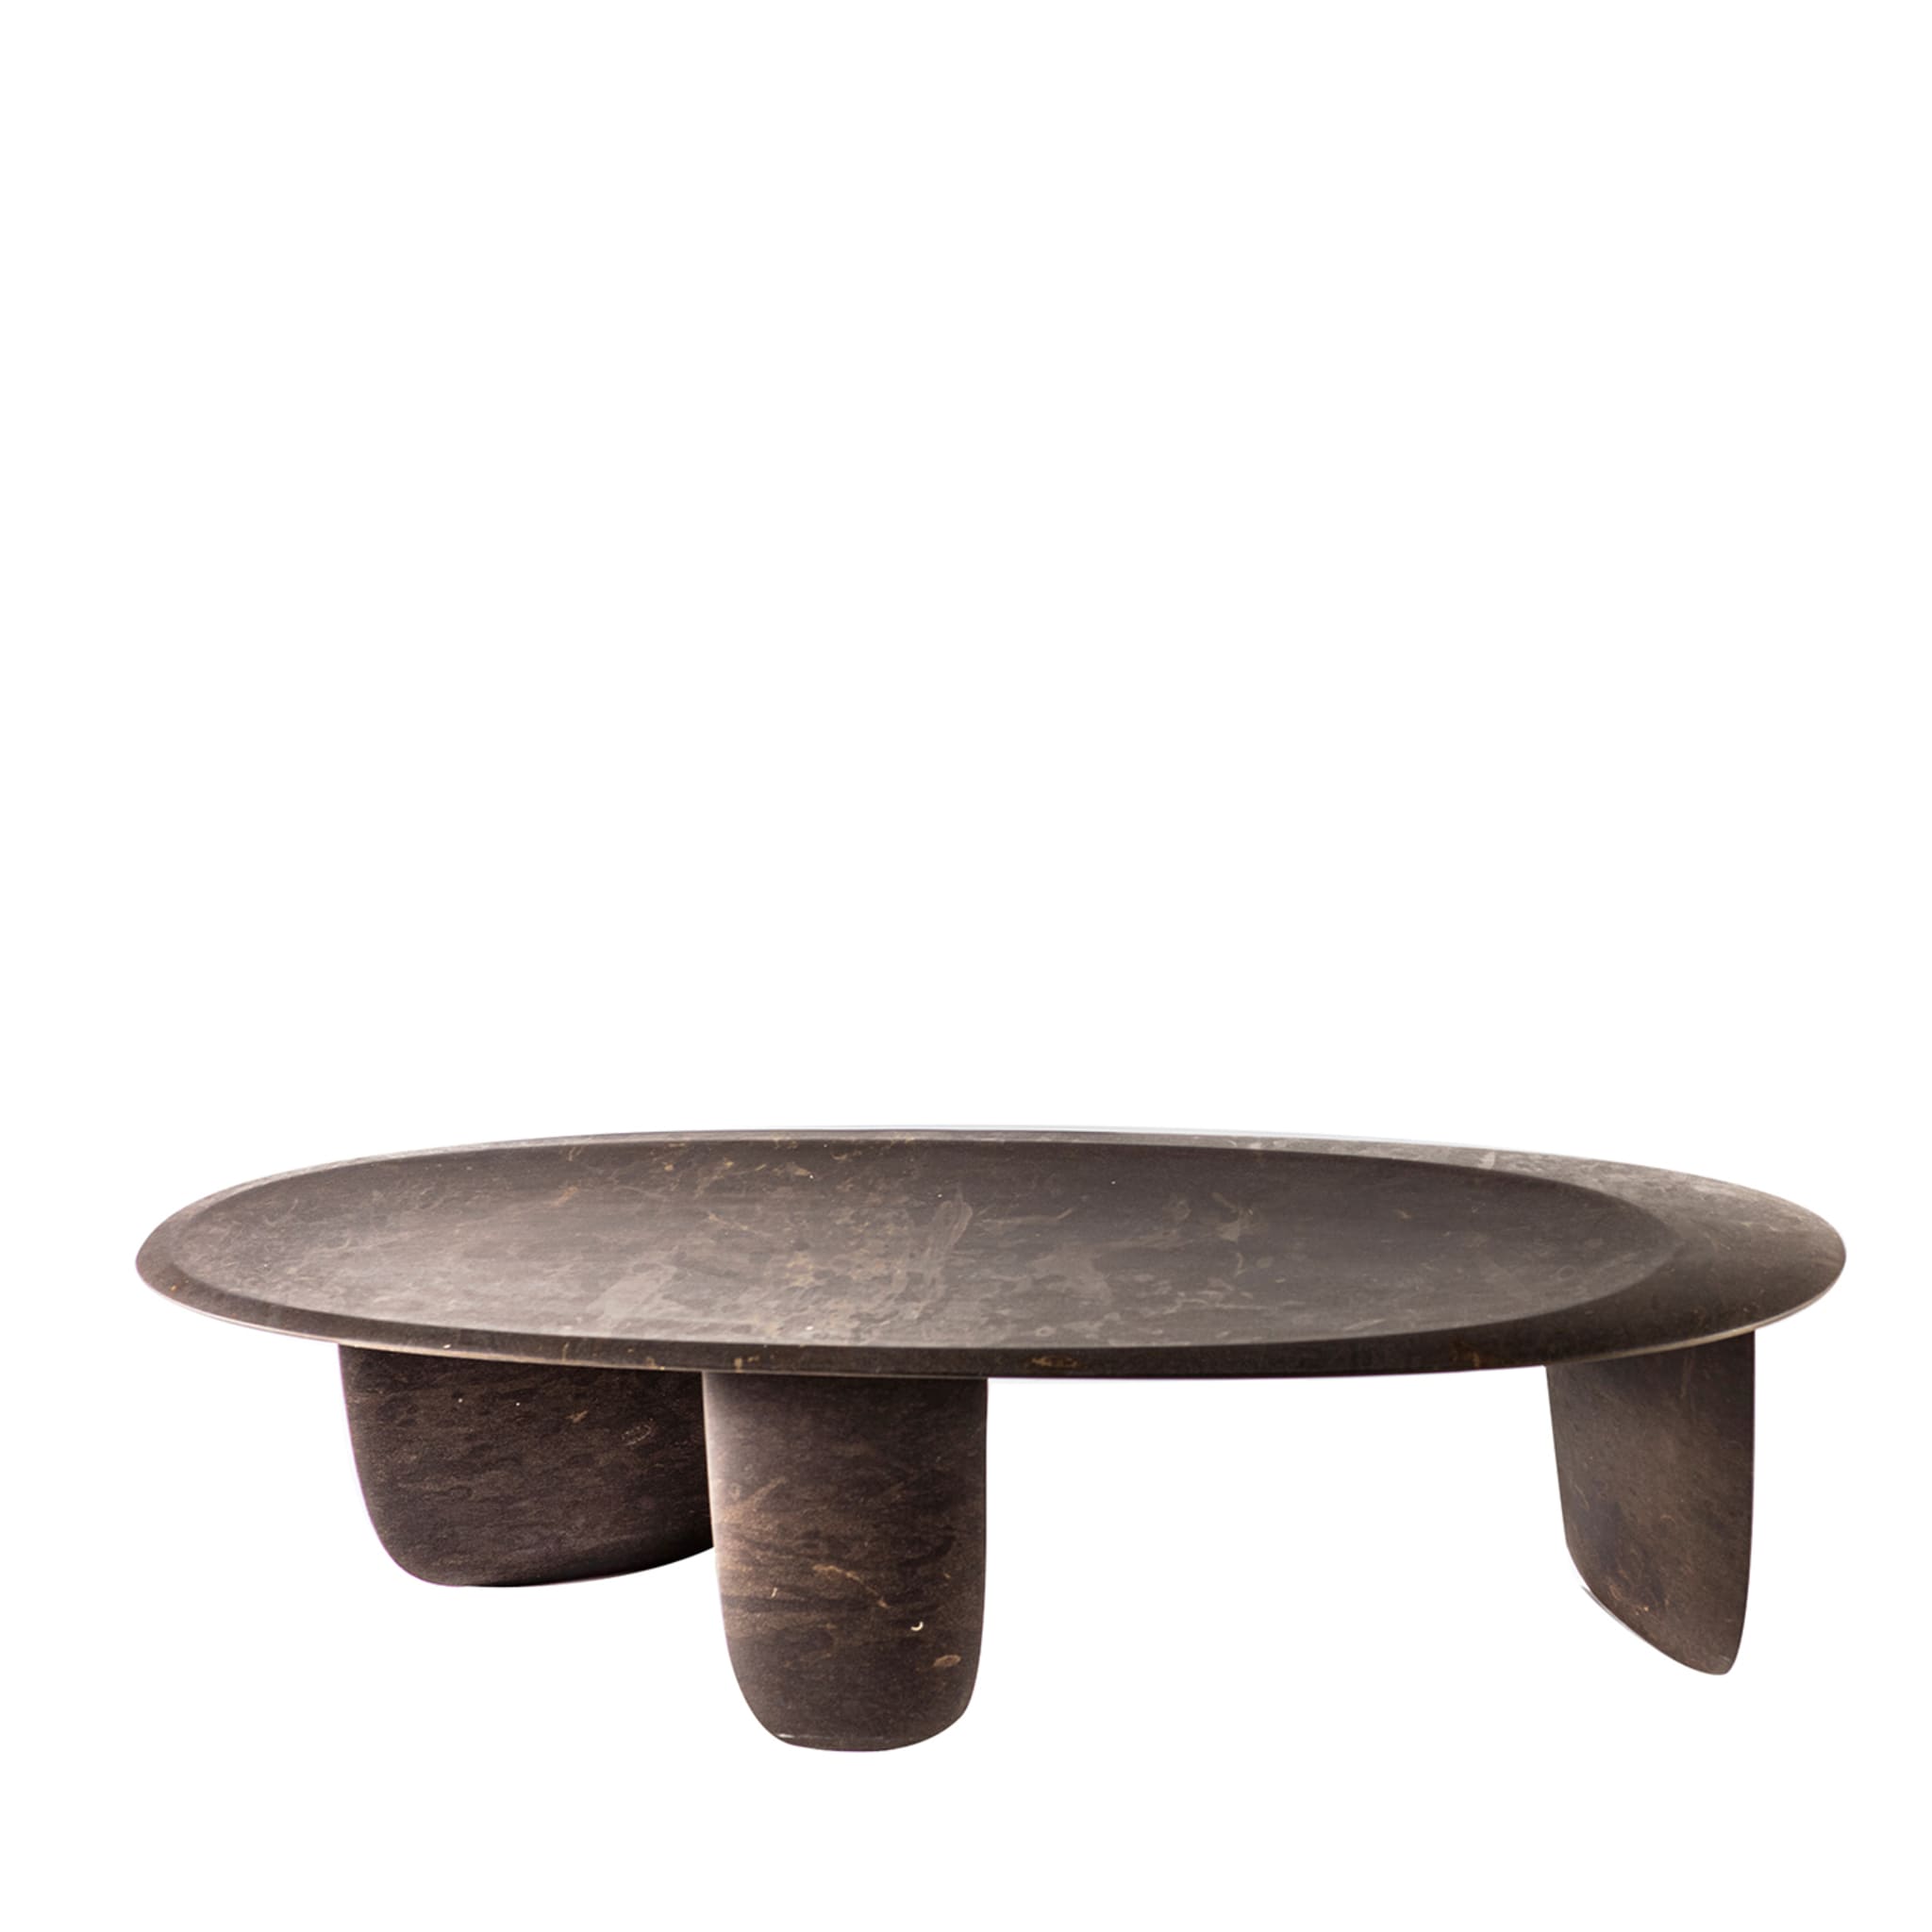 Sesi A Brown Low Coffee Table in Pietra Pece by Martinelli Venezia Studio - Main view